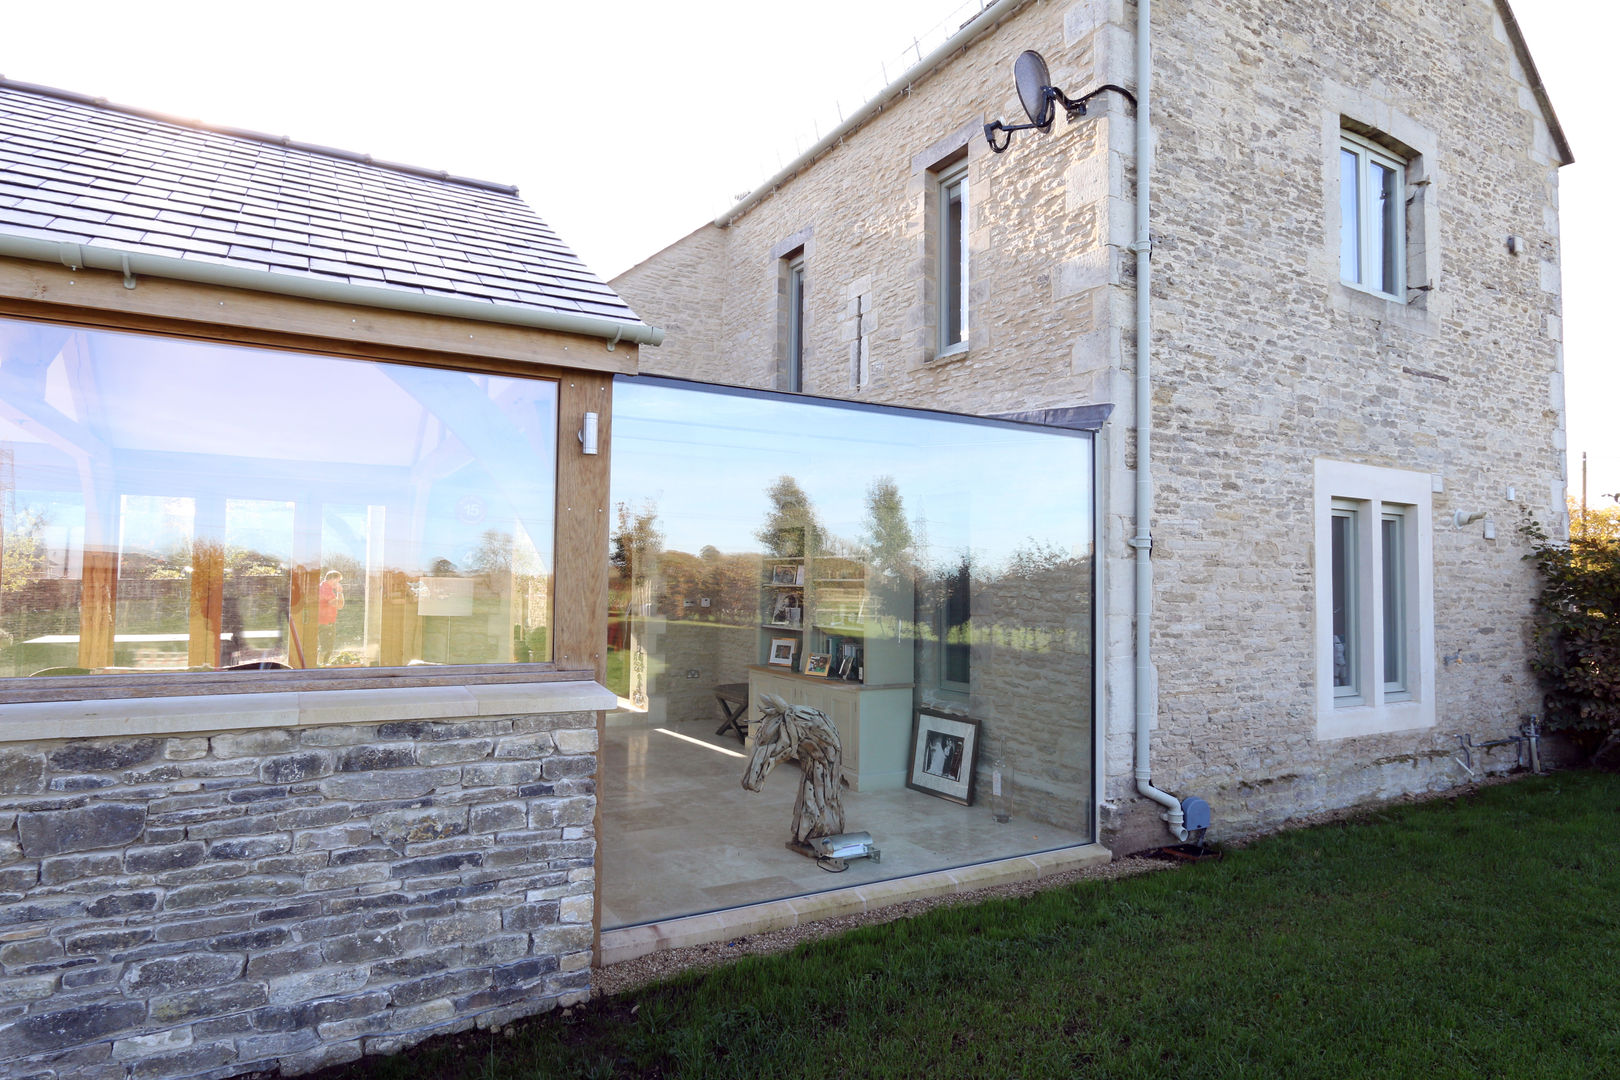 Green Barn homify Giardino d'inverno in stile rurale Green Barn,Project,Structural Glass,Cottage,Conservatory